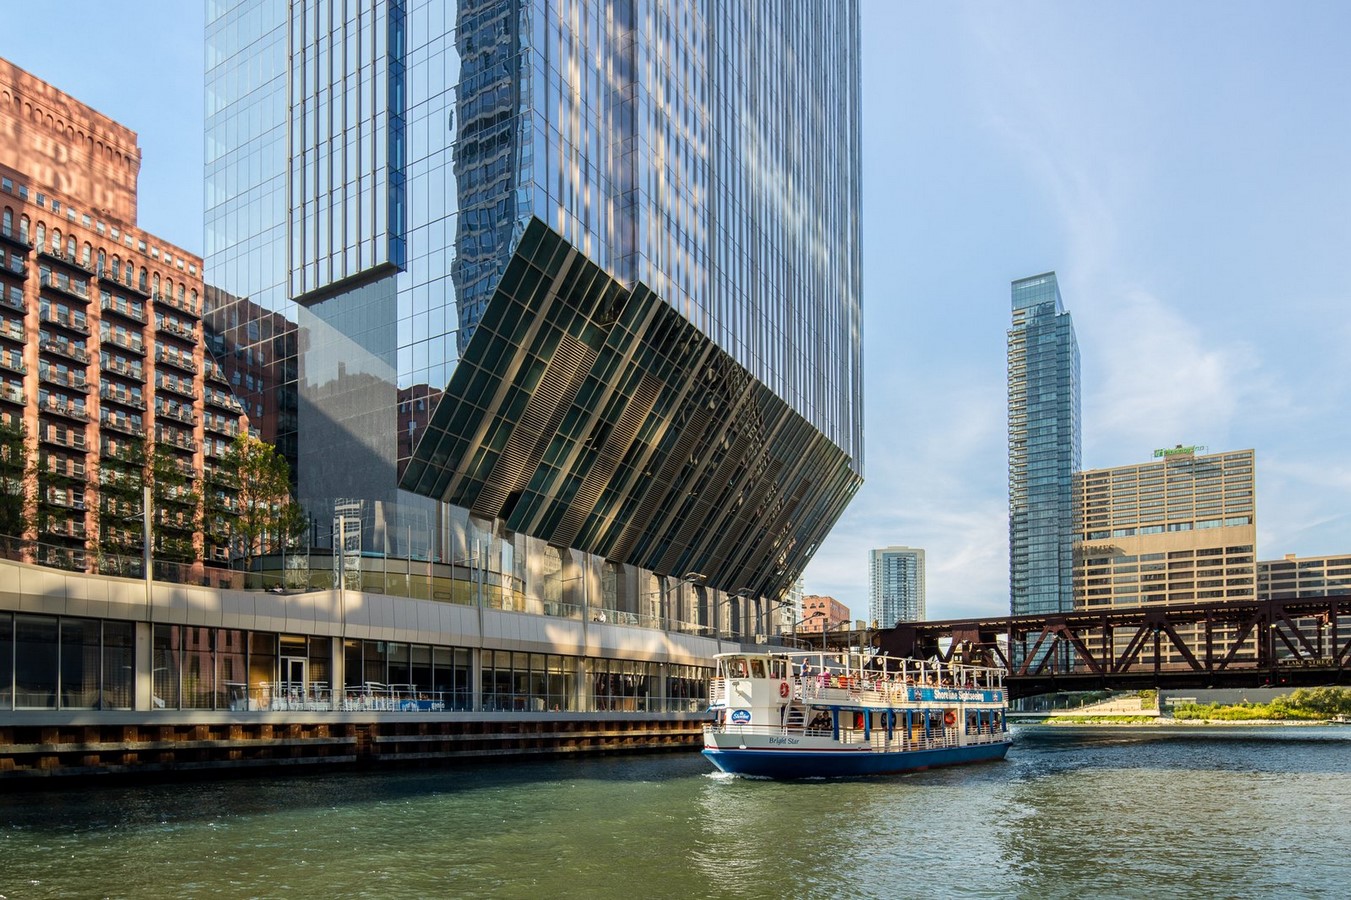 Buildings In Chicago: 15 Architectural Marvels Every Architect Must See - Sheet7